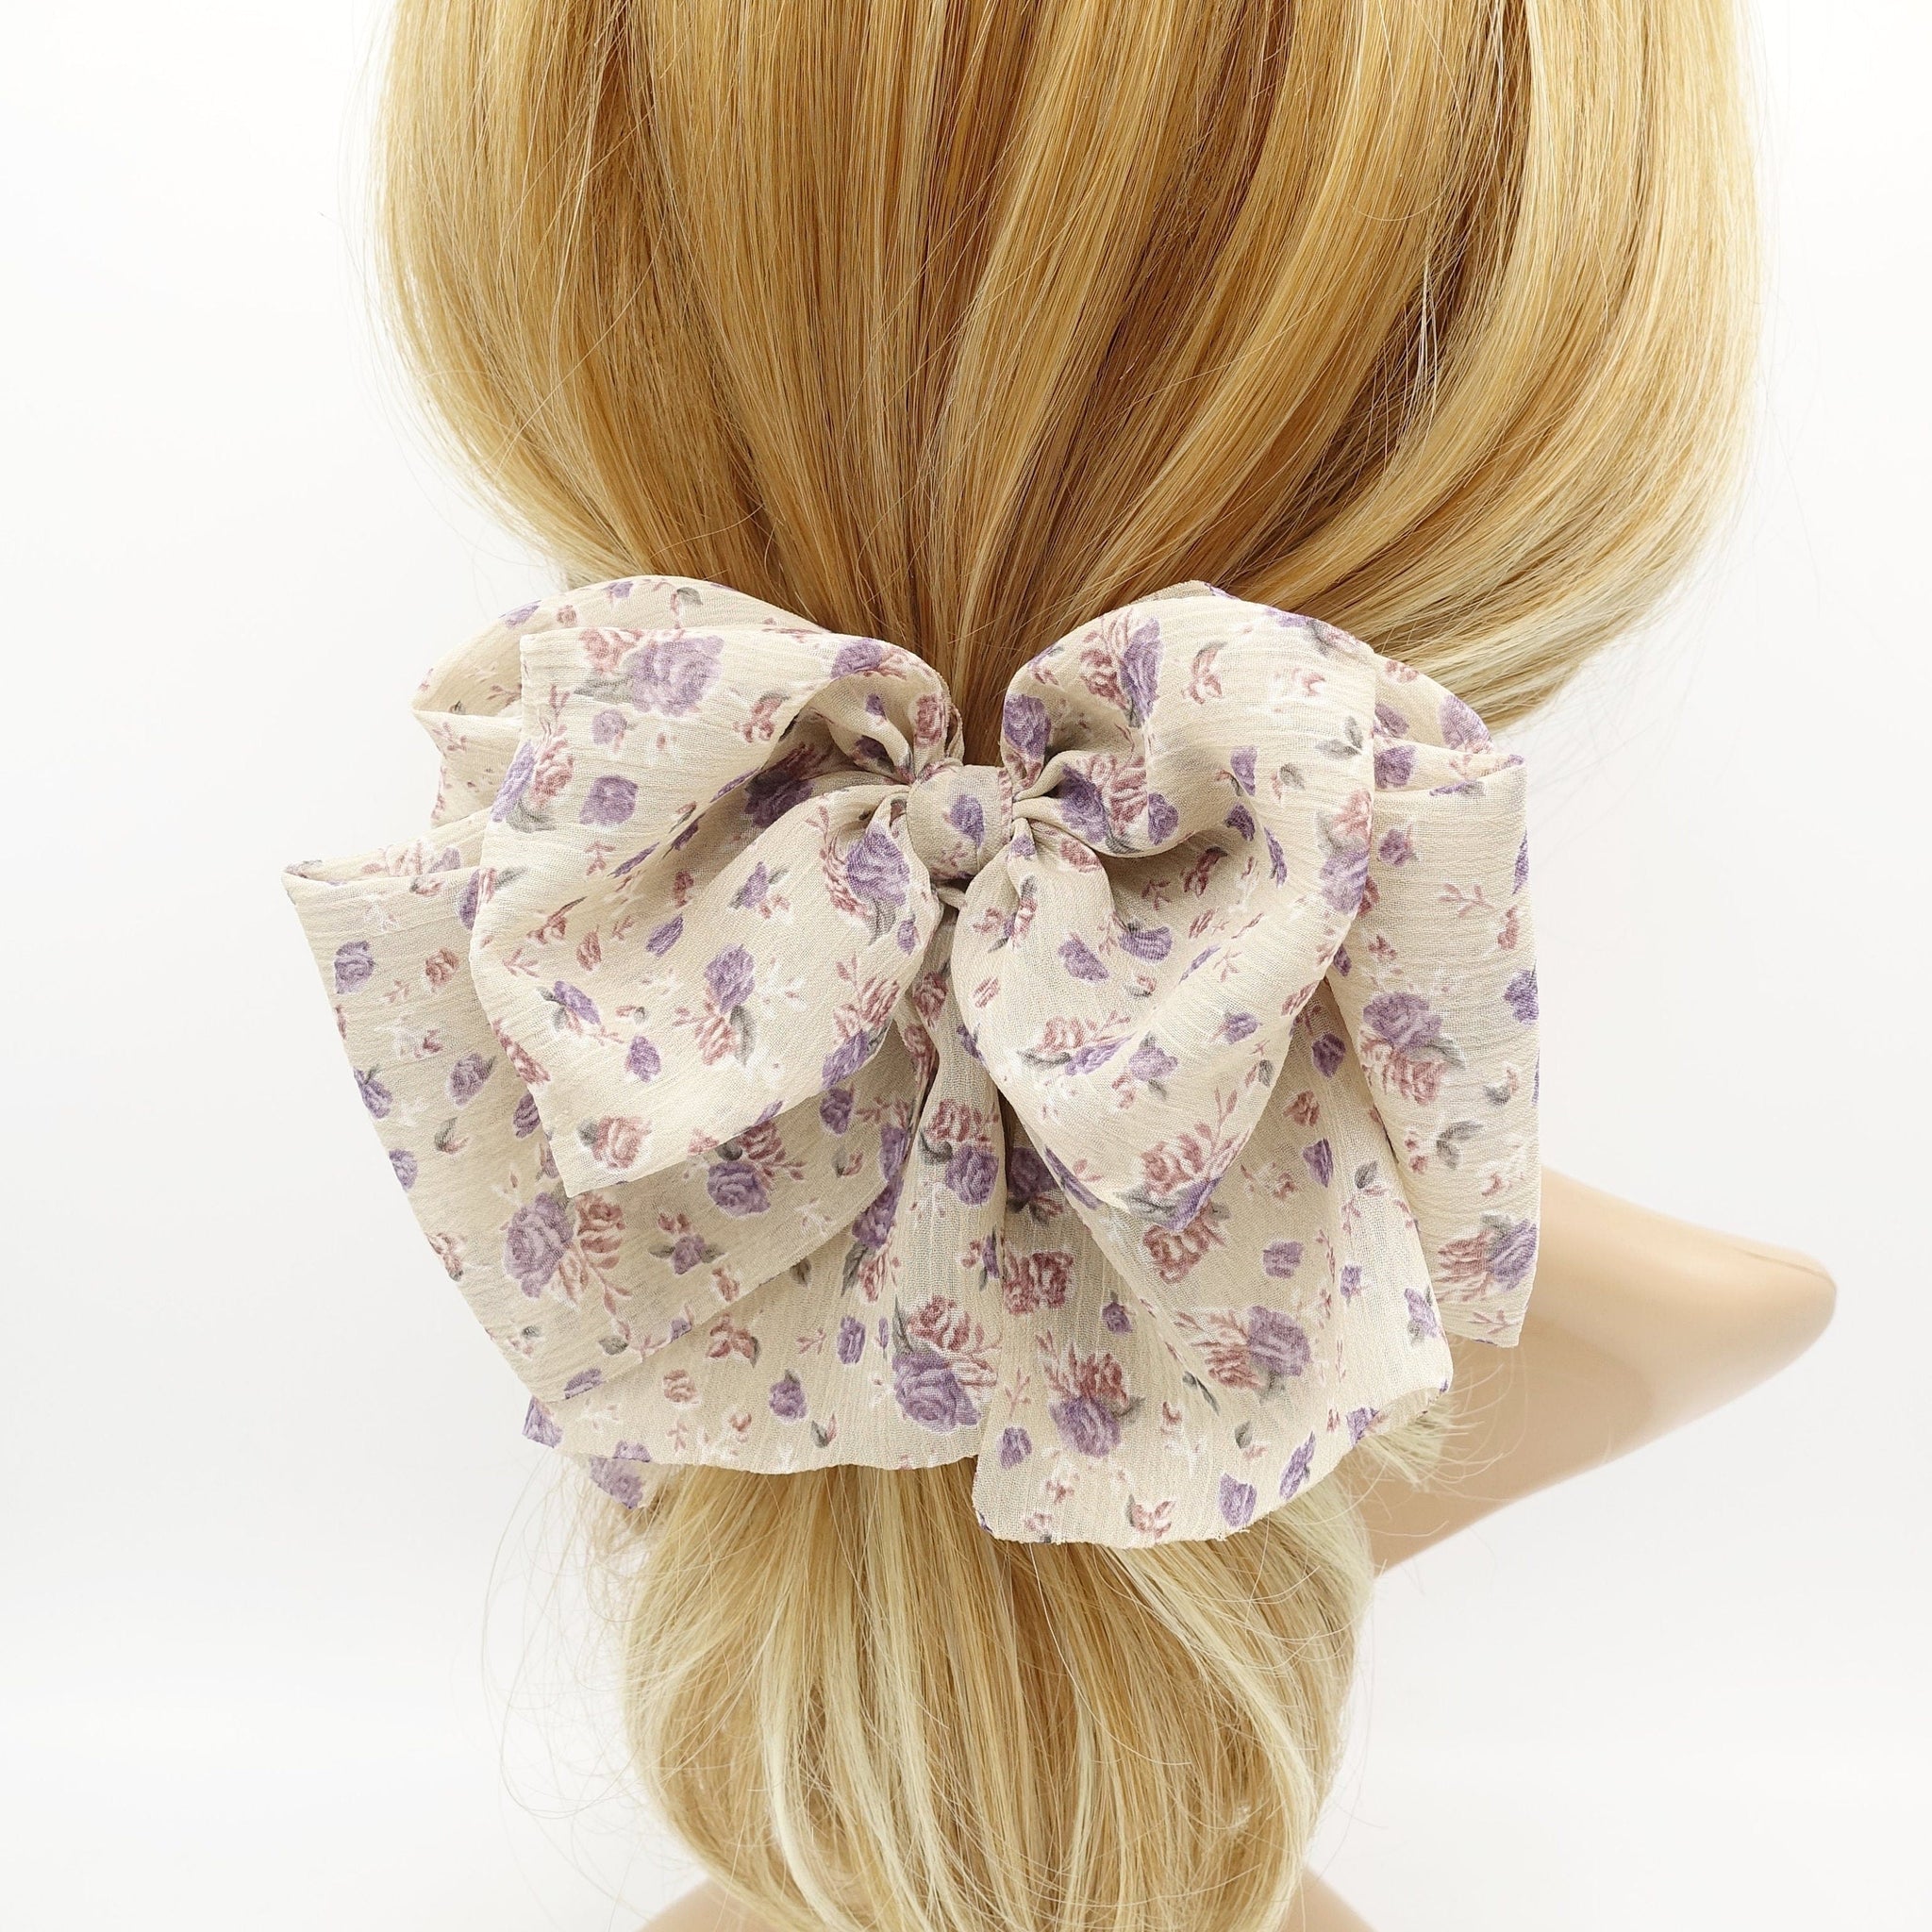 veryshine.com Barrette (Bow) Beige tiny flower print hair bow floral layered tail women hair accessory